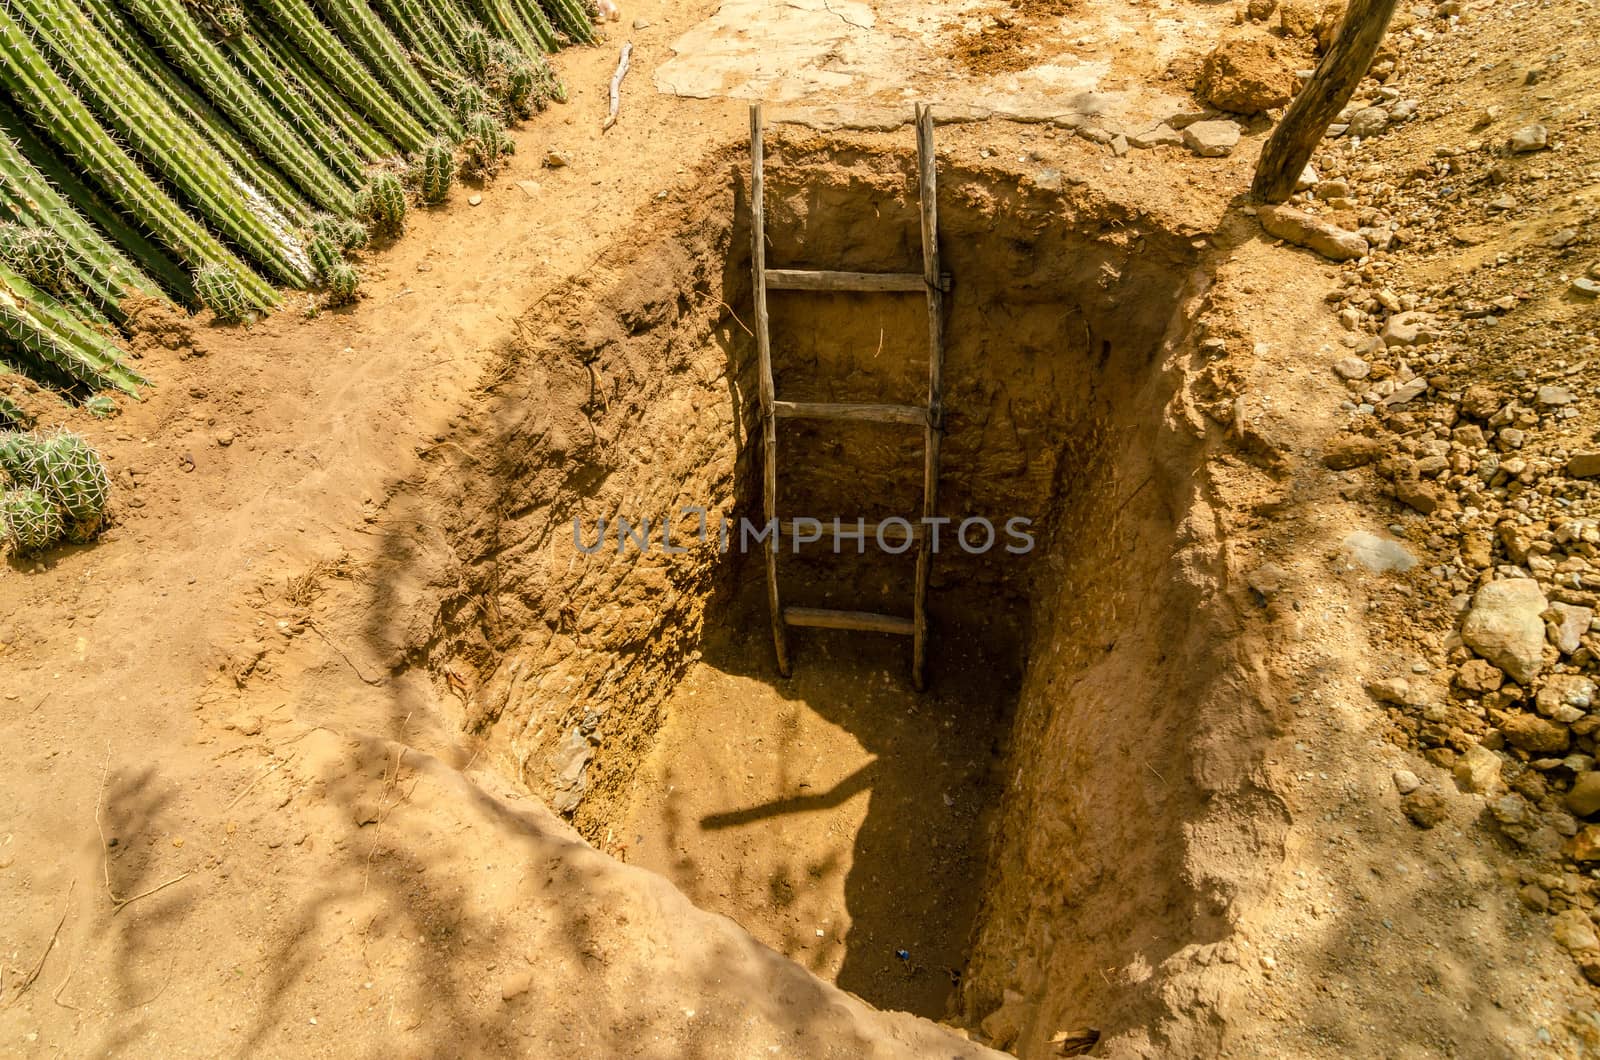 A hole in the ground with a ladder in it